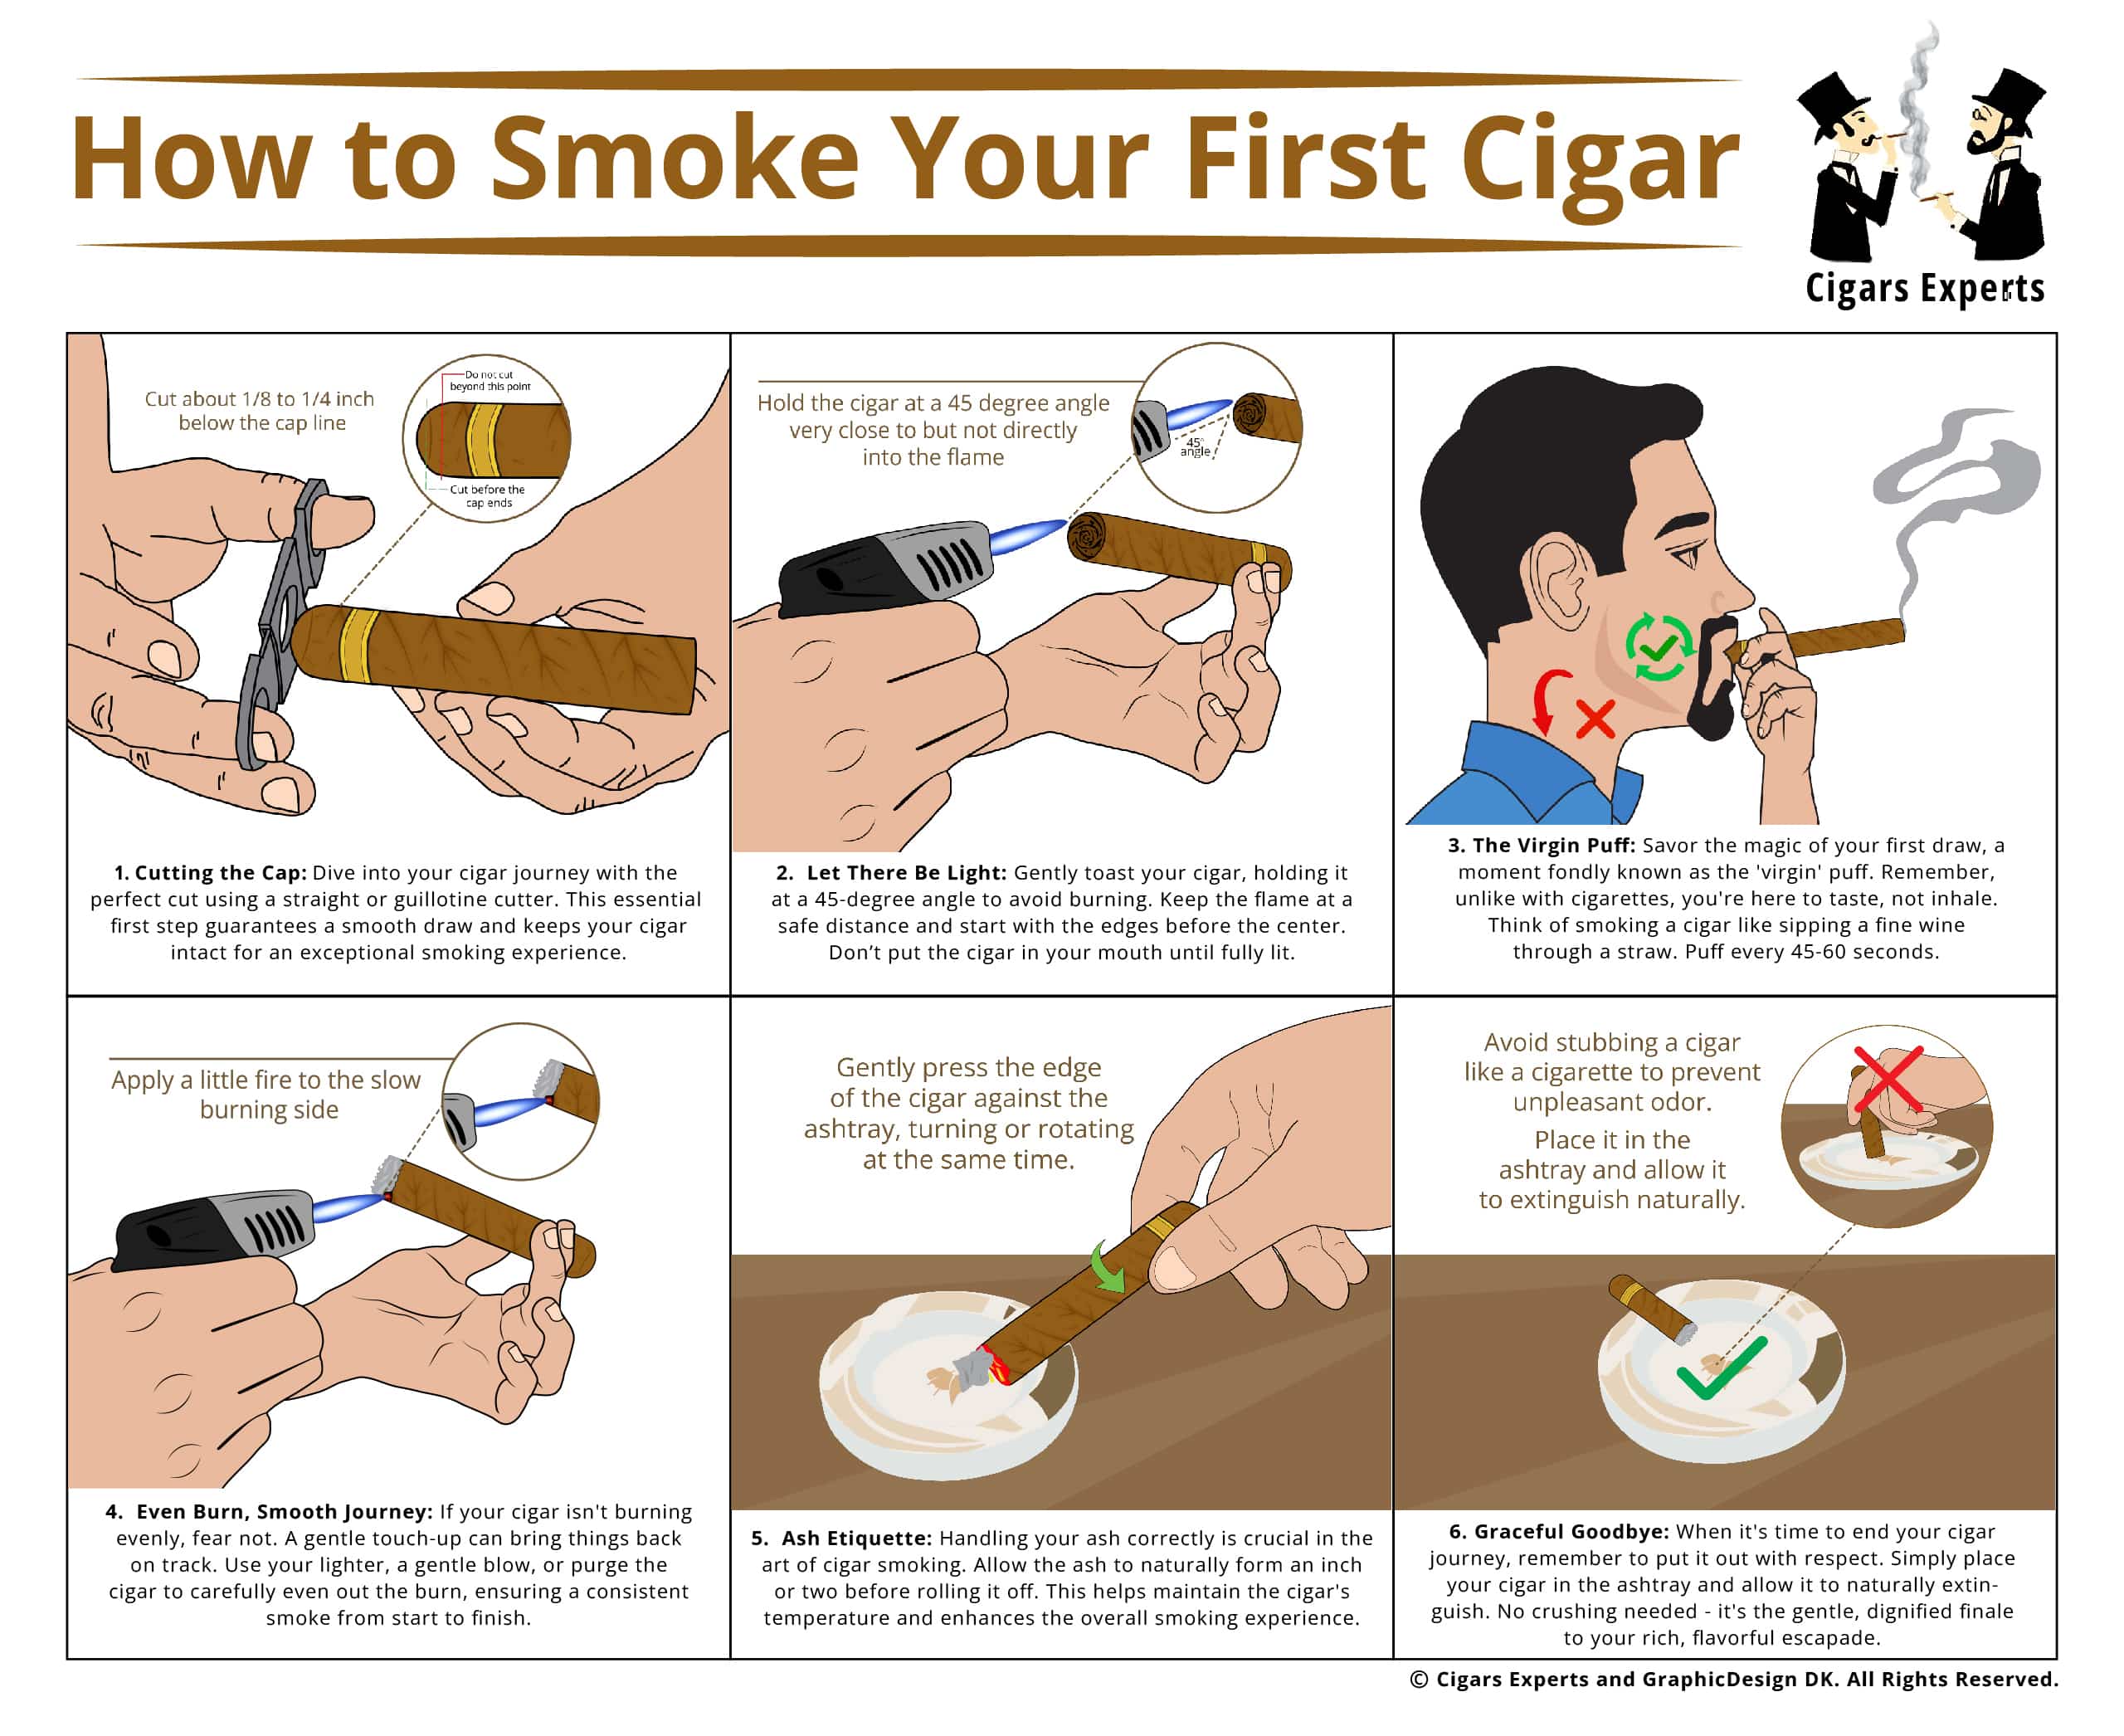 How to smoke a cigar infographic